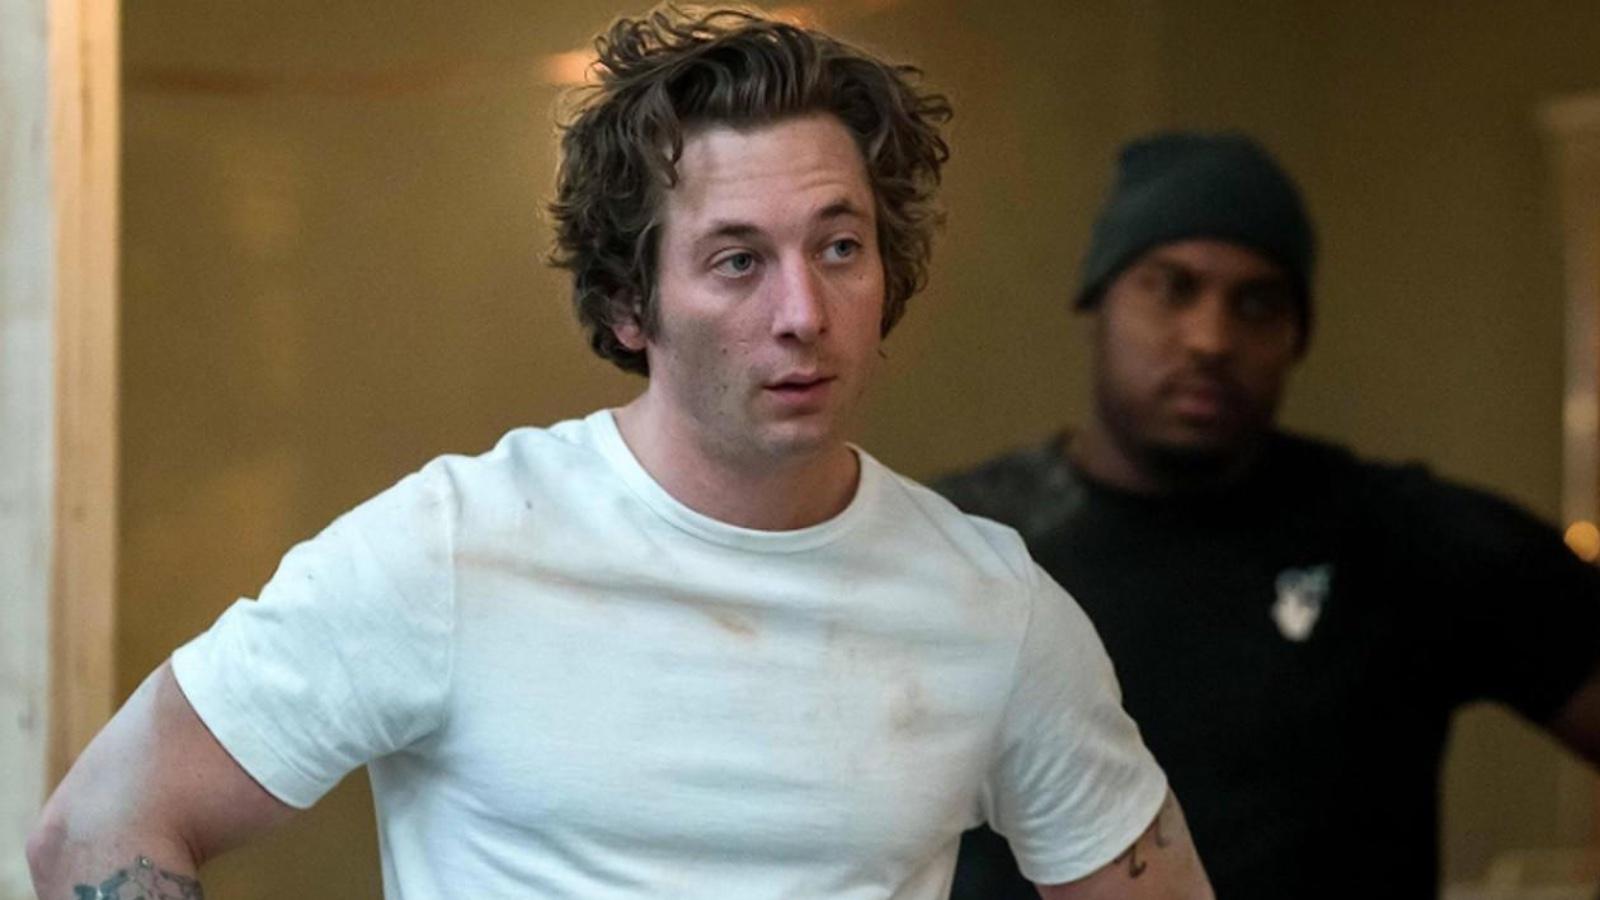 Carmy in The Bear Seson 2 played by Jeremy Allen White.